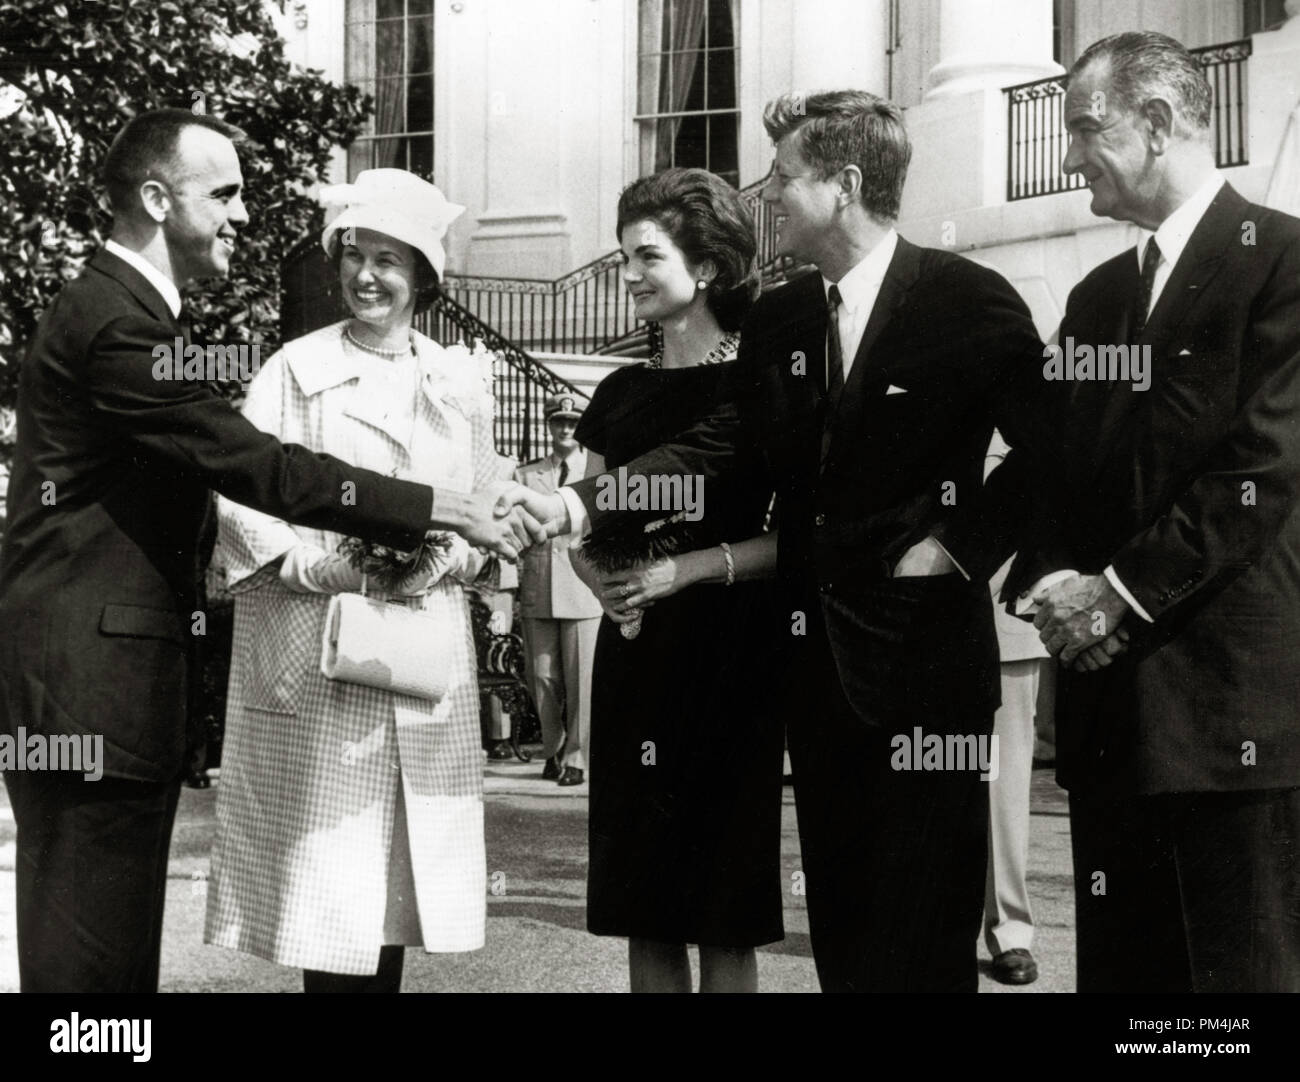 Commander Alan Shepard, first American in space, shakes hands with President John F. Kennedy. Also present are Mrs. Shepard, Jacqueline Bouvier Kennedy and Vice-President Lyndon B. Johnson, May 9, 1961   File Reference # 1003 642THA Stock Photo